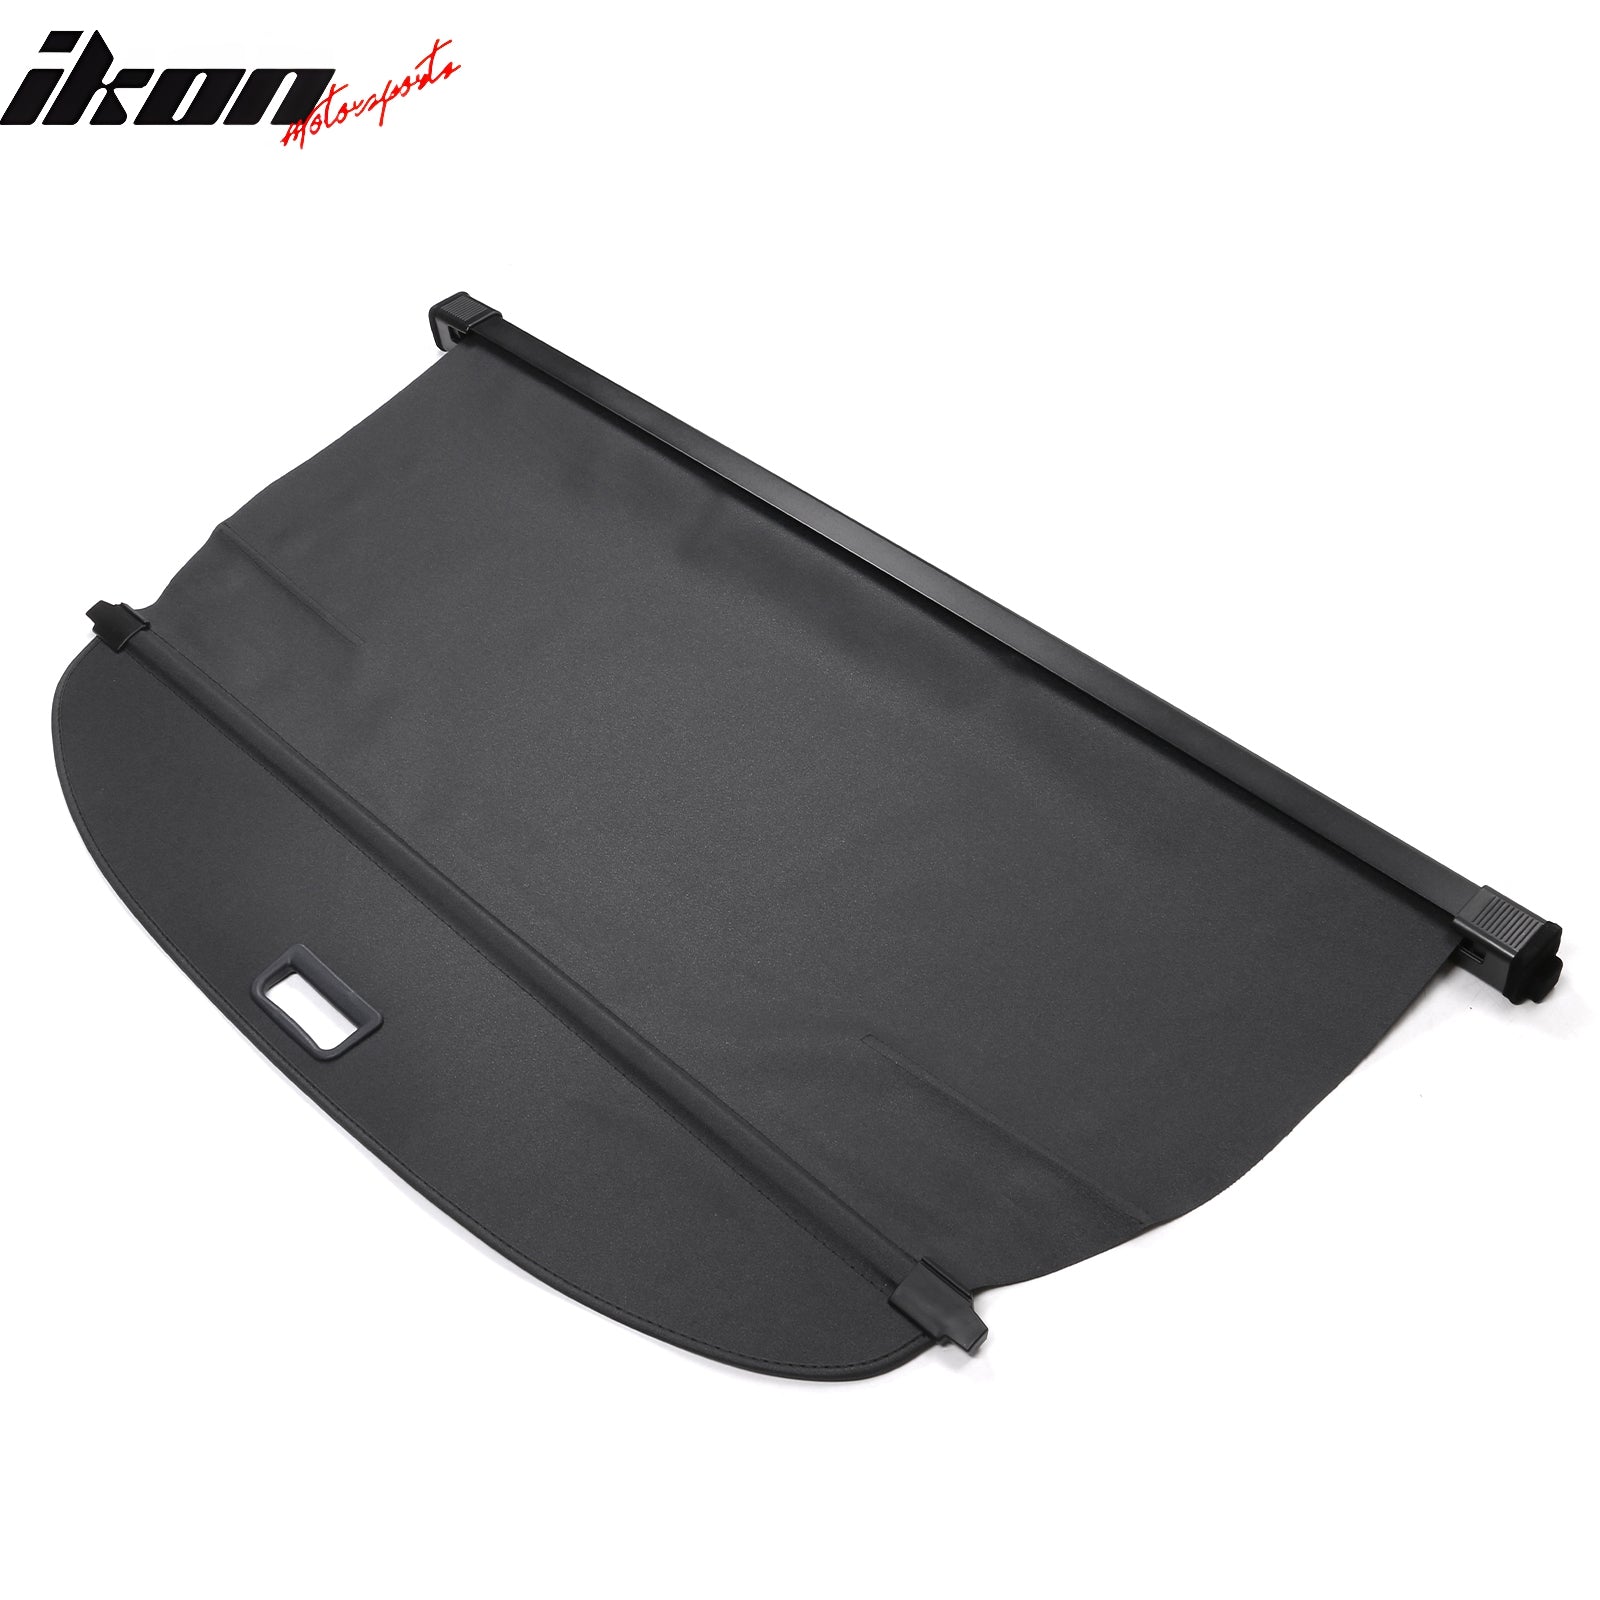 Fit 2018-2024 Nissan Leaf Non-retractable Parcel Shelf Cover for 2018 2019  2020 2021 2022 2023 2024 Nissan Leaf Hatchback Accessories Rear Trunk Board  Security Shield Shade Cover, Black 